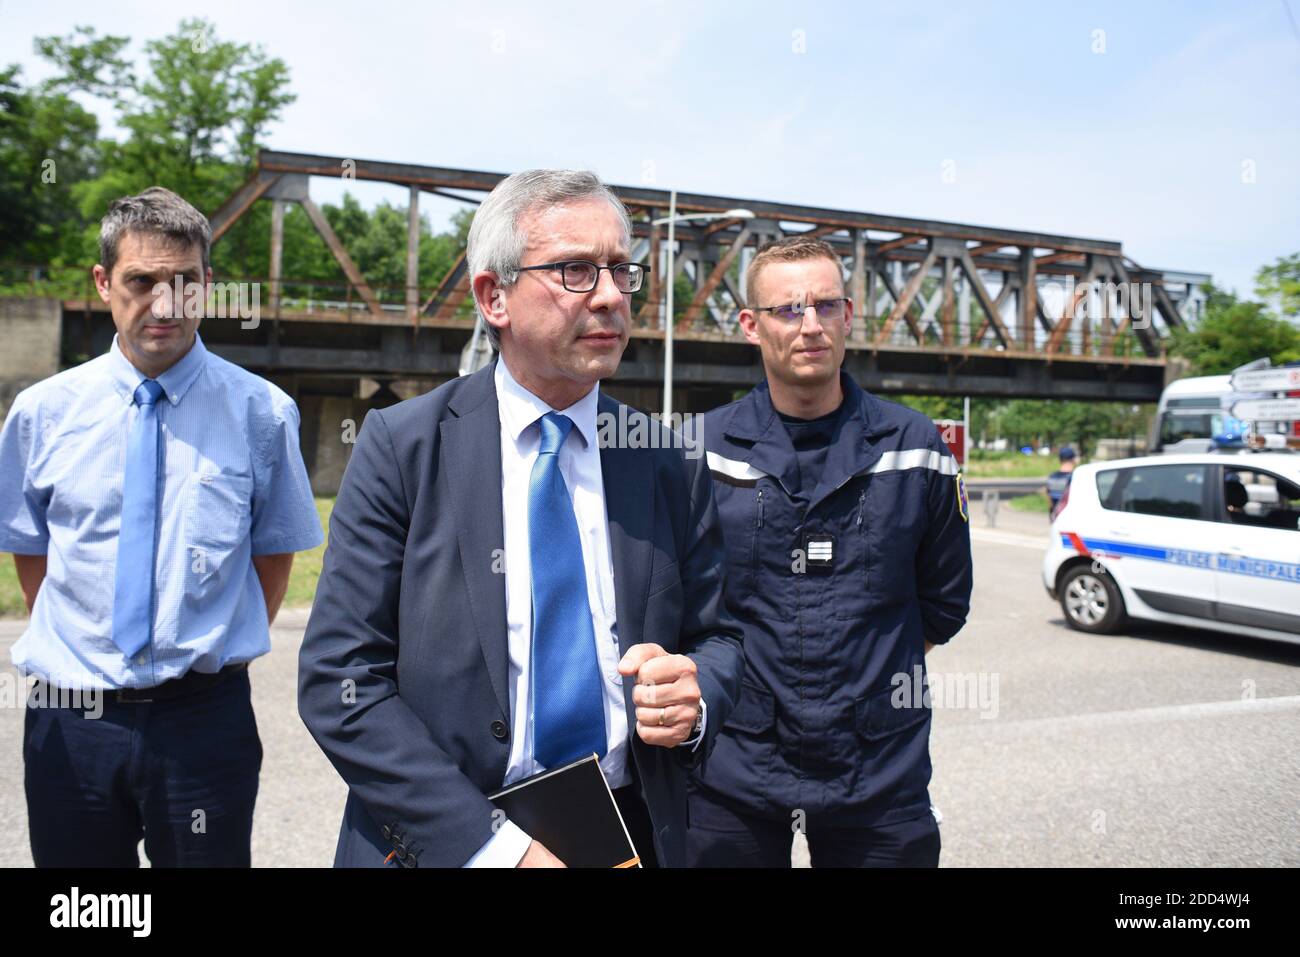 Genaral Secretary of Great Est Region, Yves Seguy speaks to the press after the explosion of the grain reserve Silostra (sillot grains), in Strasbourg, France, on June 6, 2018. Photo by Nicolas Roses/ABACAPRESS.COM Stock Photo